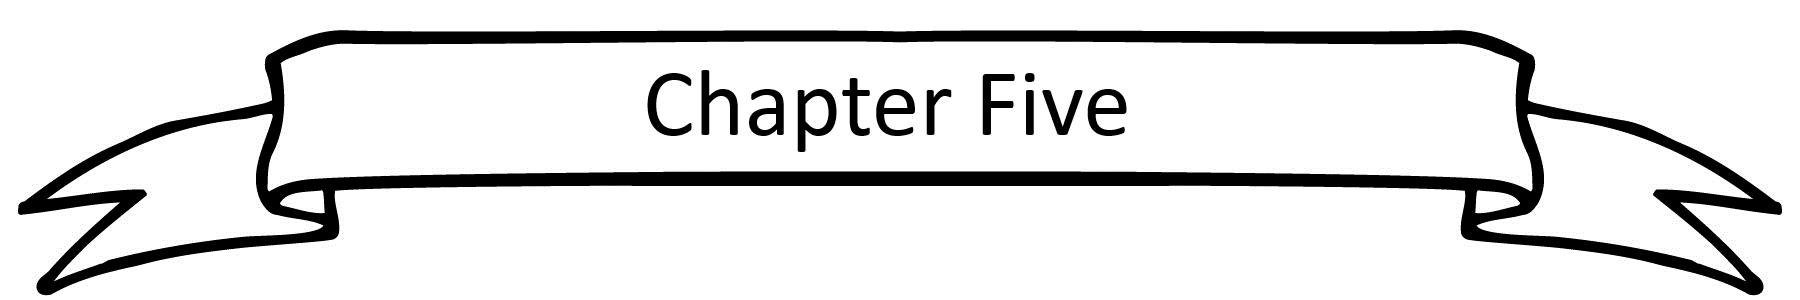 chapter five heading